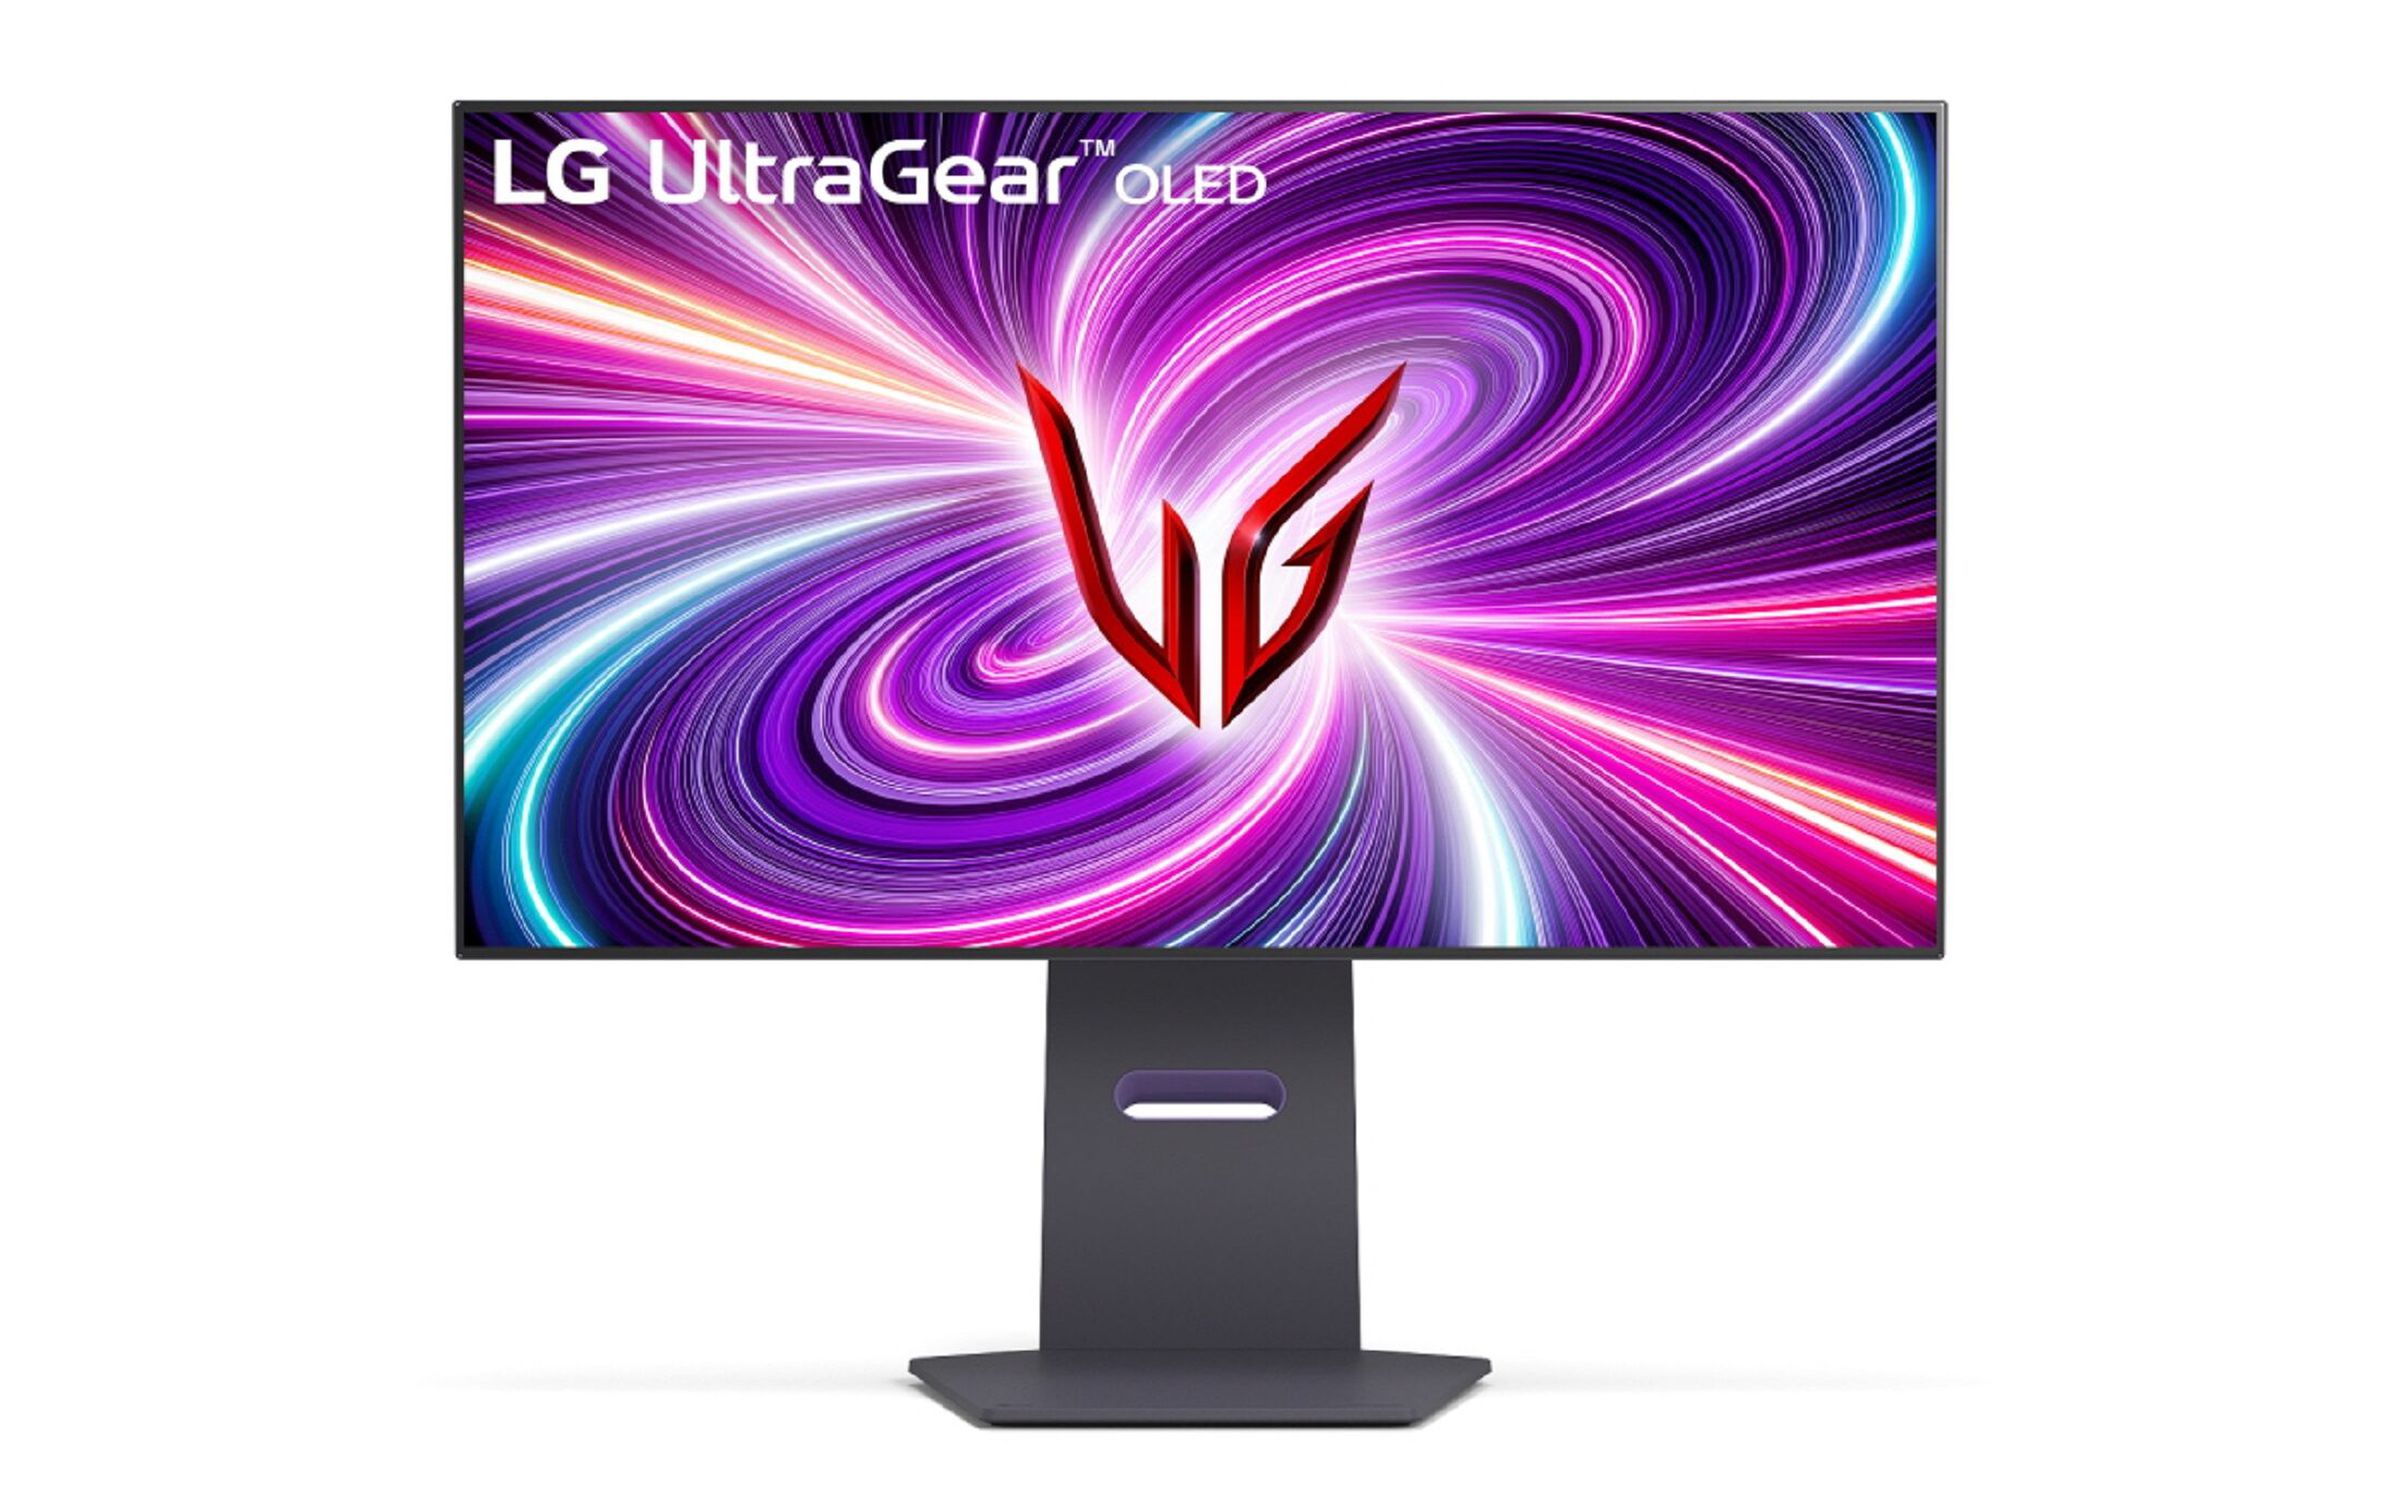 LG 32GS95UE monitor from the front.